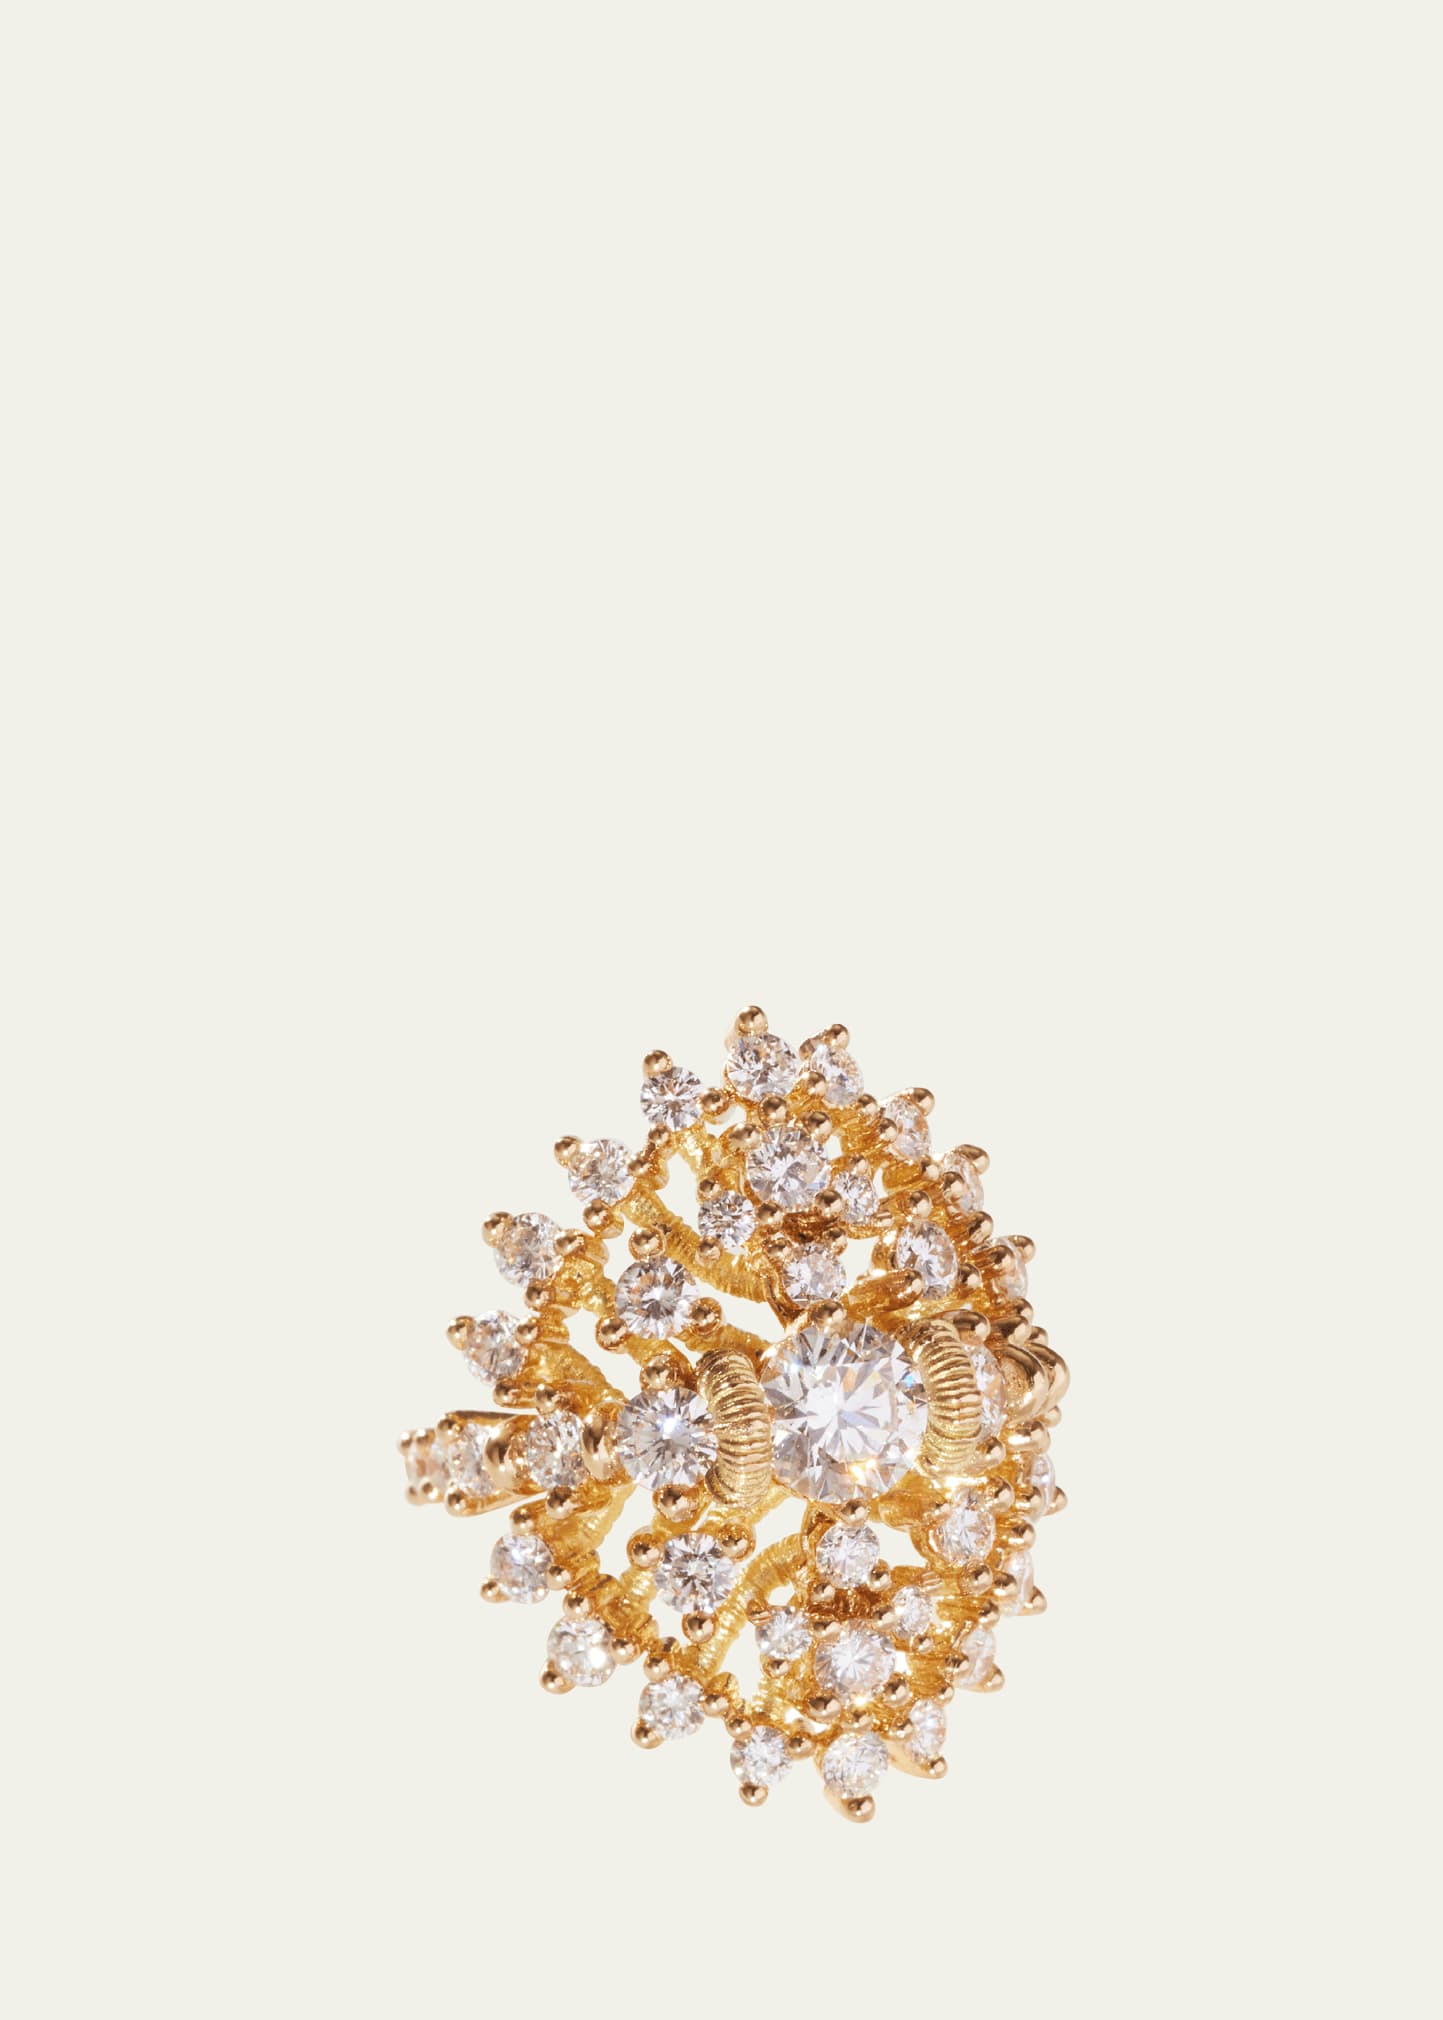 Oscar Massin Souveraine Beaded 18k Recycled Yellow Gold Lab Grown Diamond Statement Ring, 3.8tcw